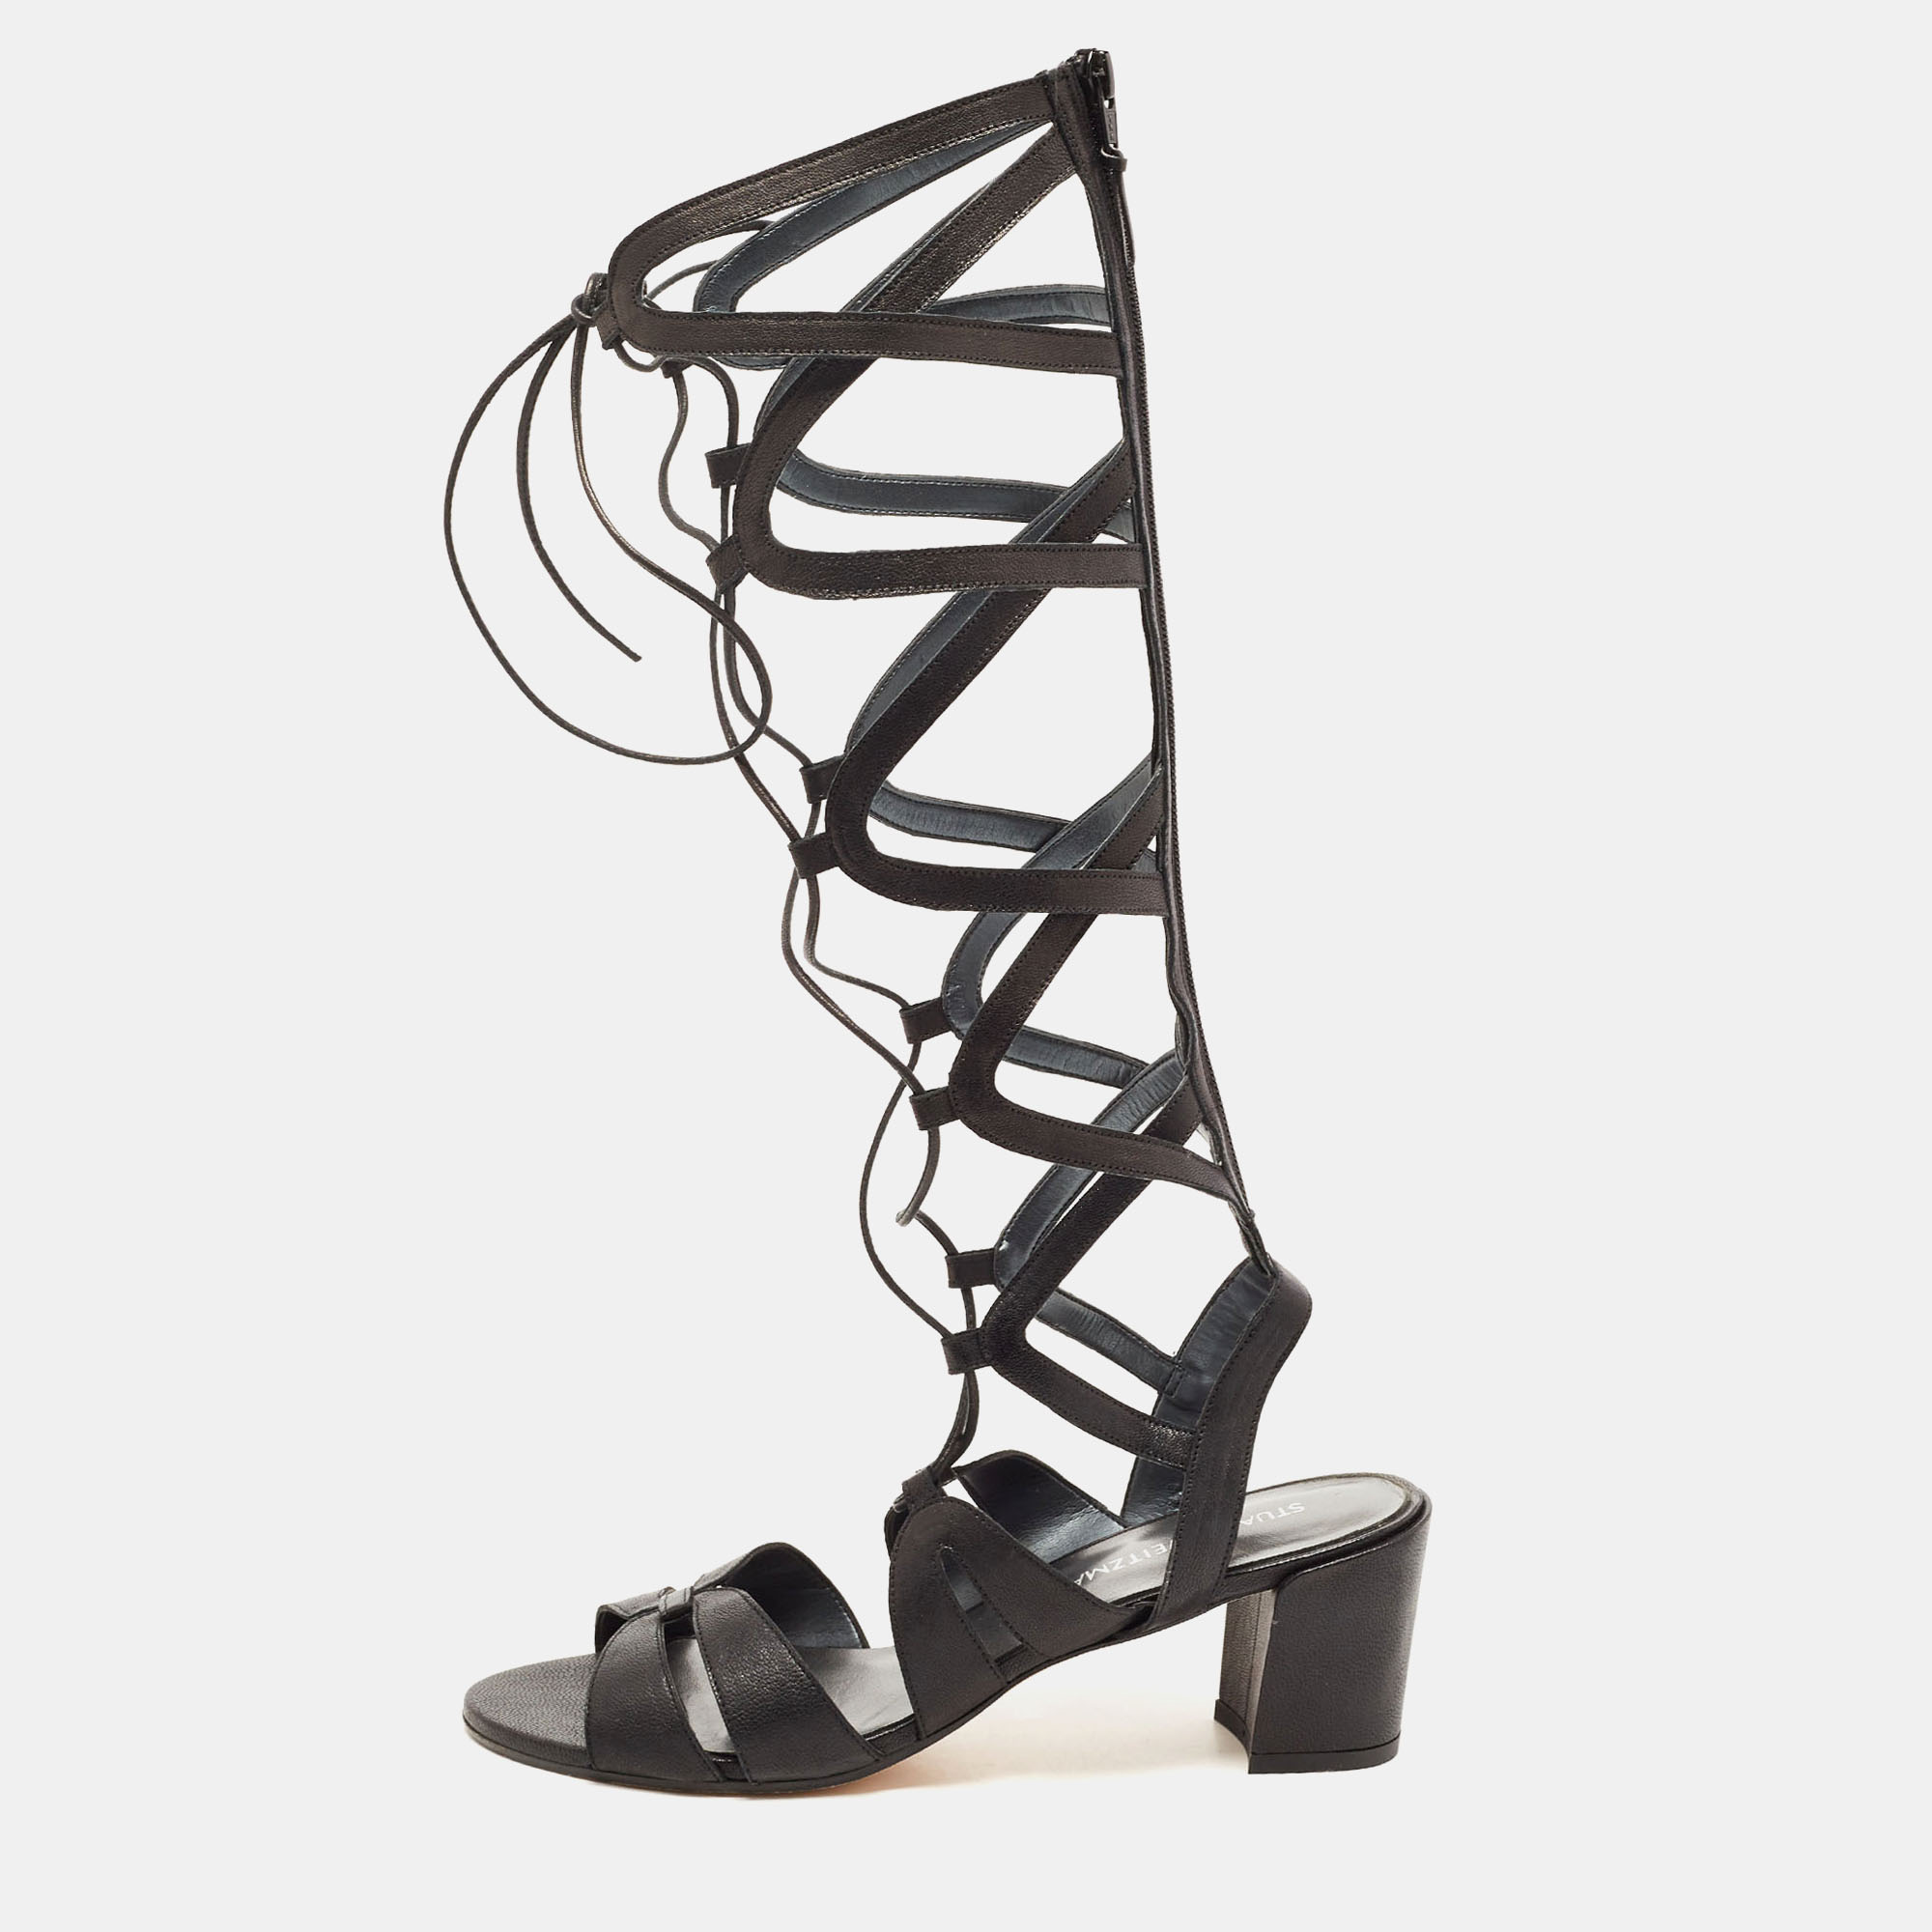 Pre-owned Stuart Weitzman Black Leather Grecian Gladiator Sandals Size 36